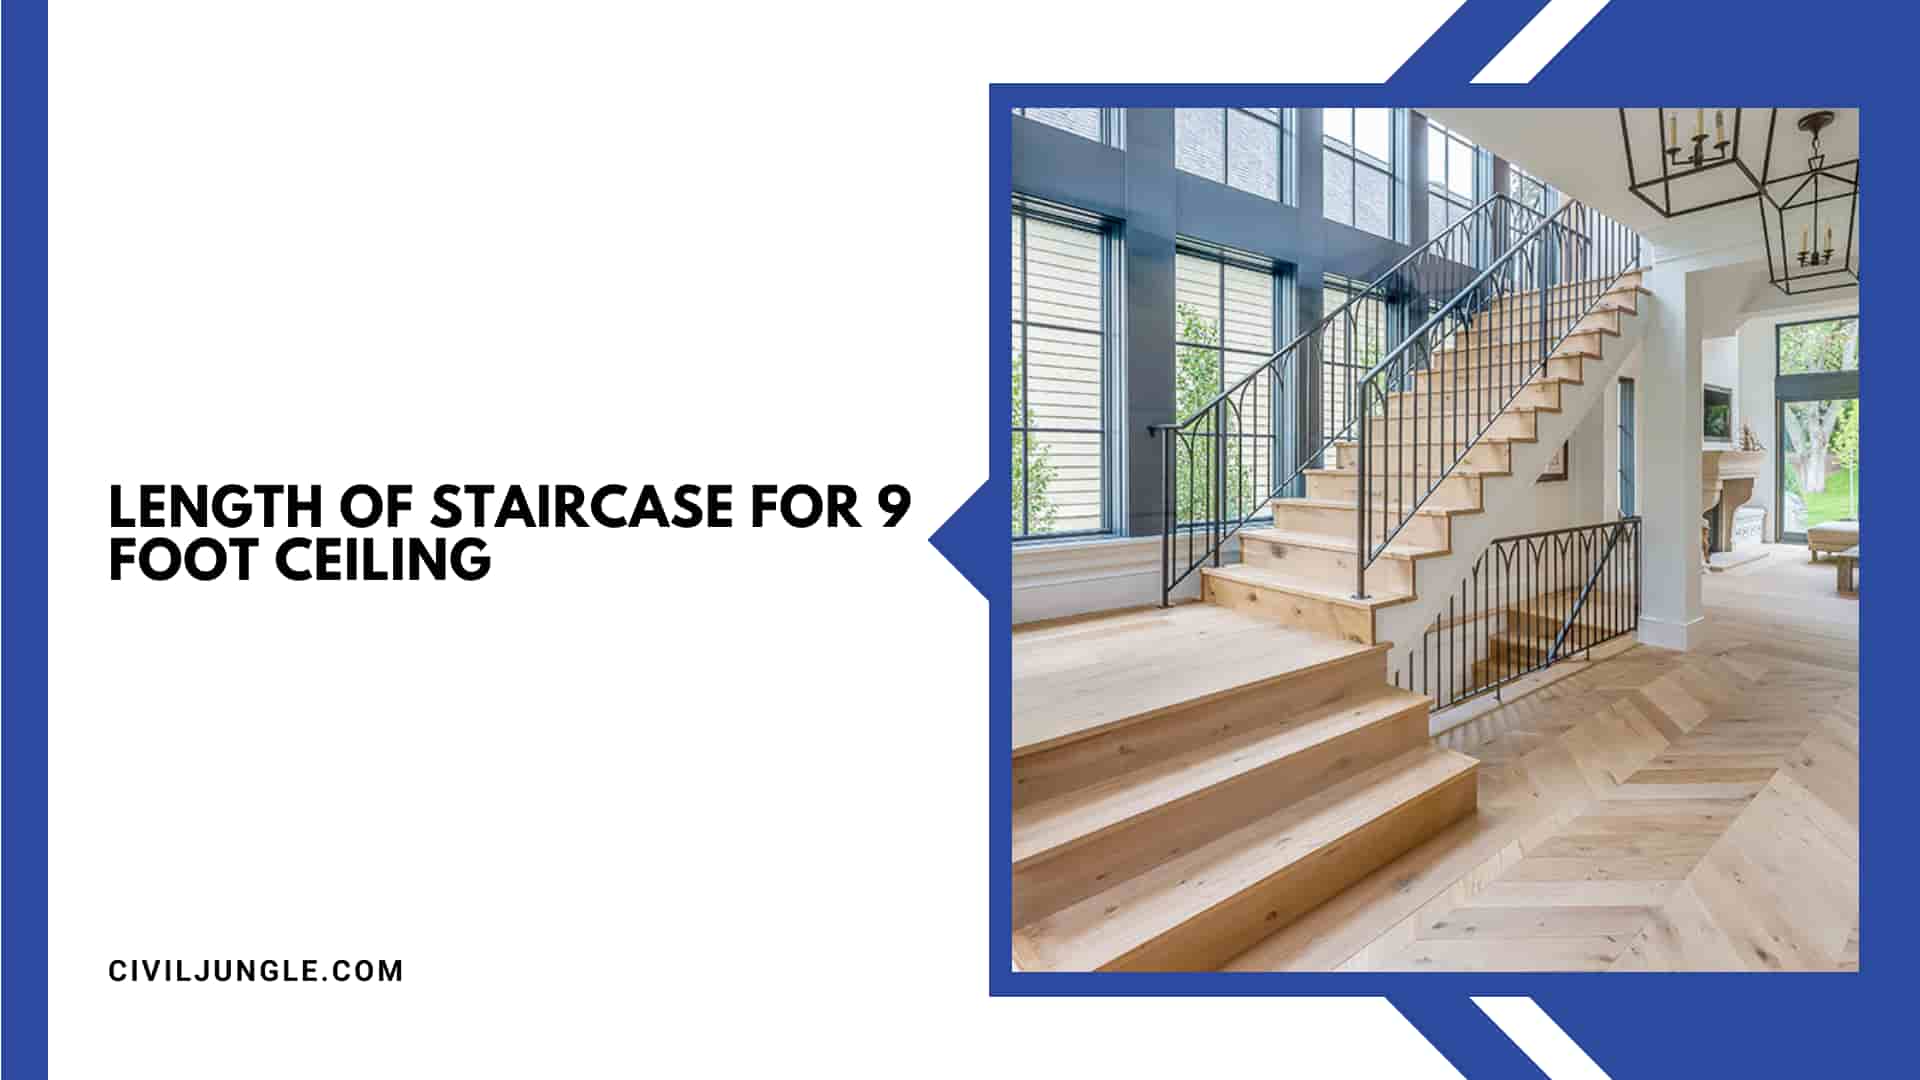 Length of Staircase for 9 Foot Ceiling